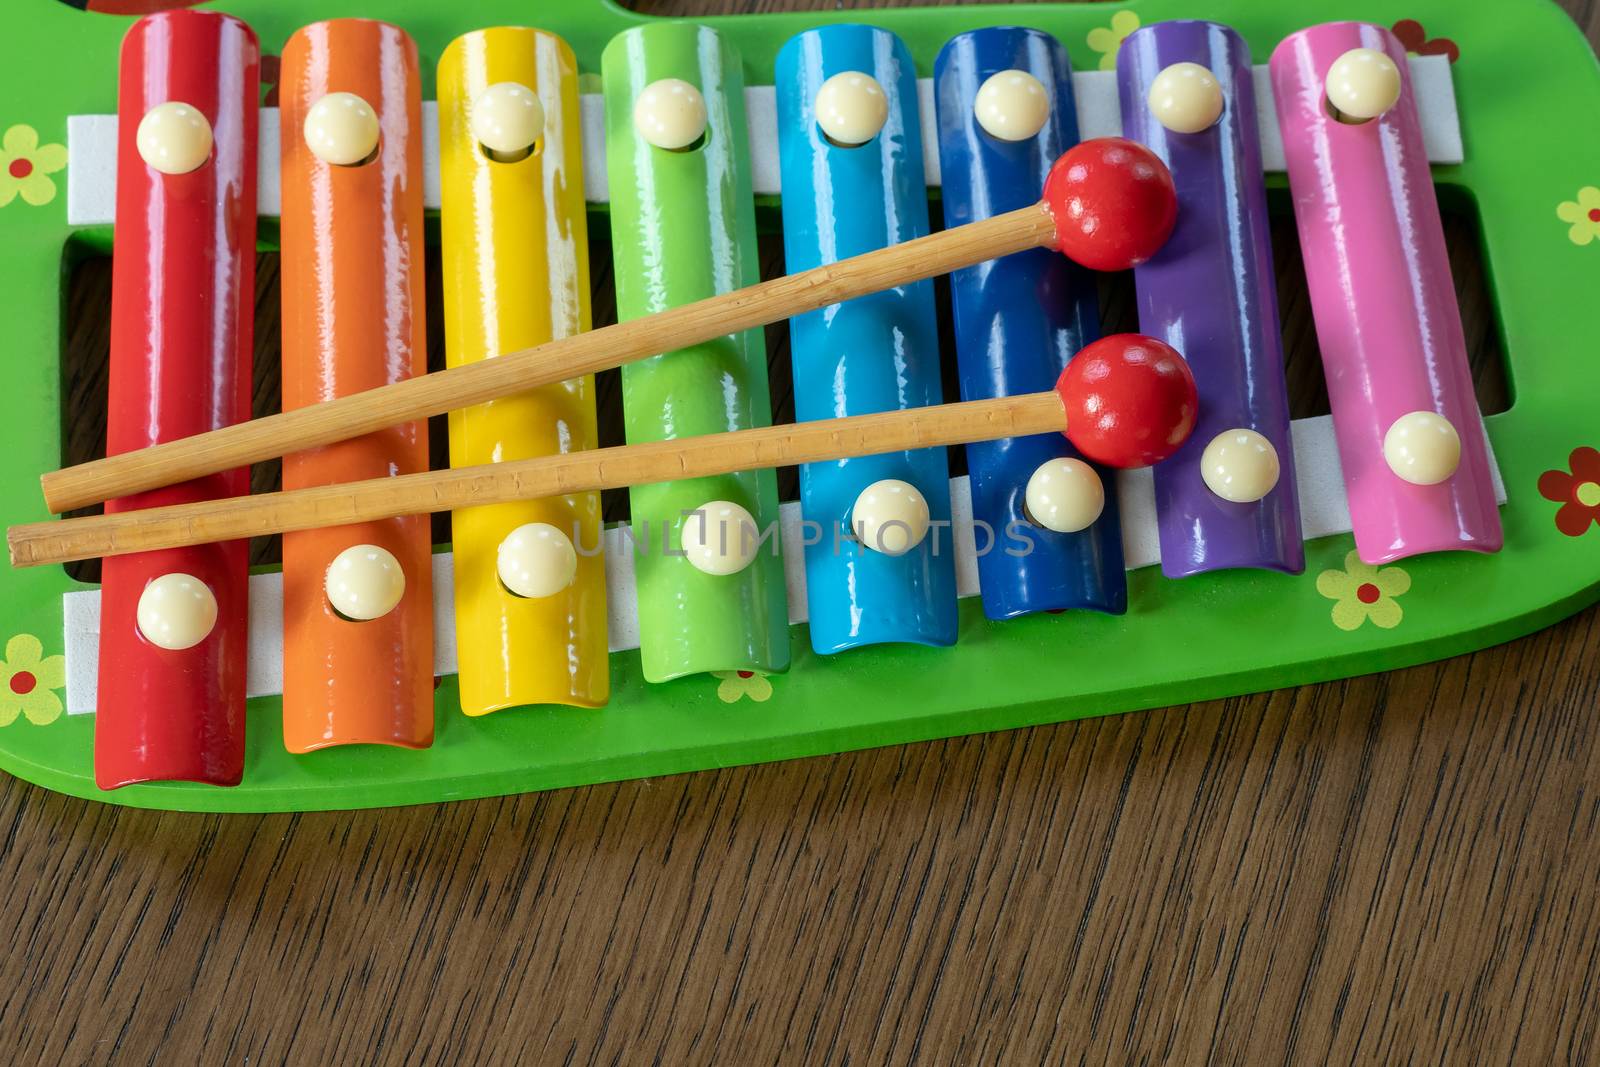 Musical instrument xylophone. Rainbow colored toy xylophone.